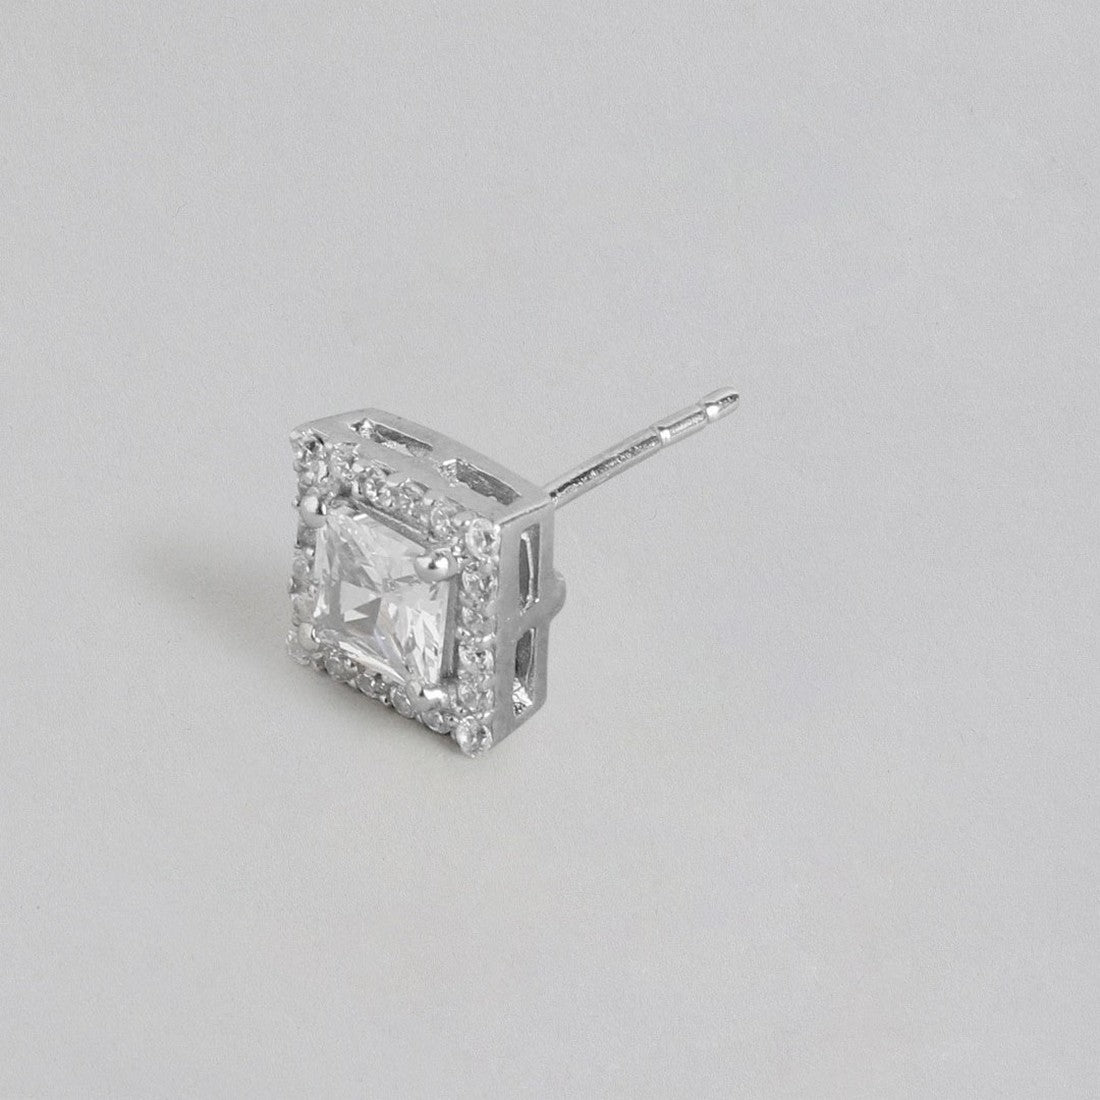 CZ Studded Rhodium Plated 925 Sterling Silver Studs